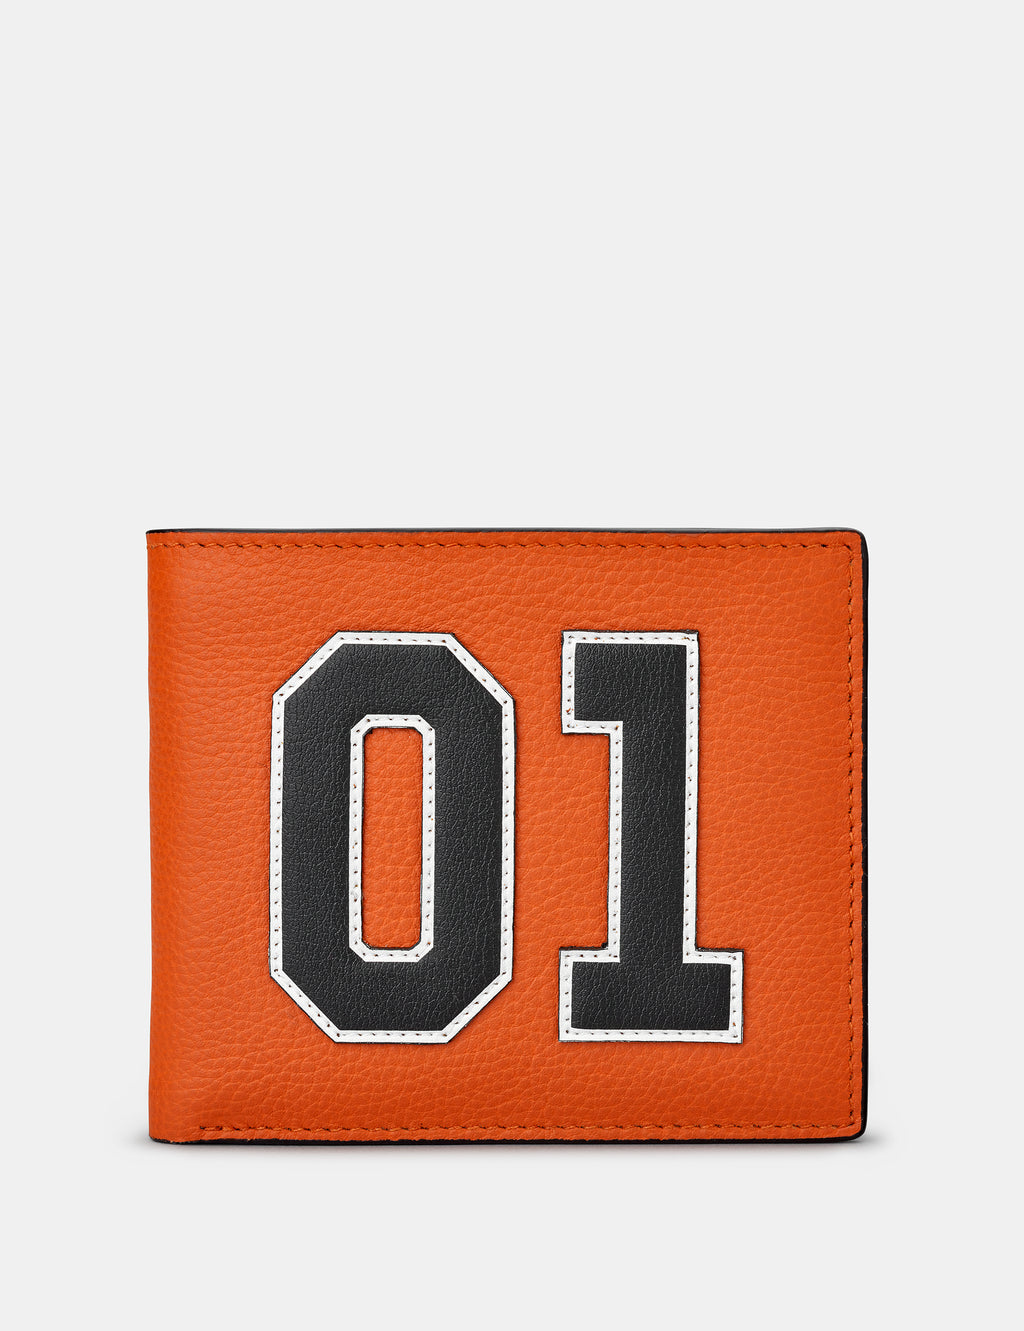 Car Livery No. 1 Orange and Black Leather Wallet